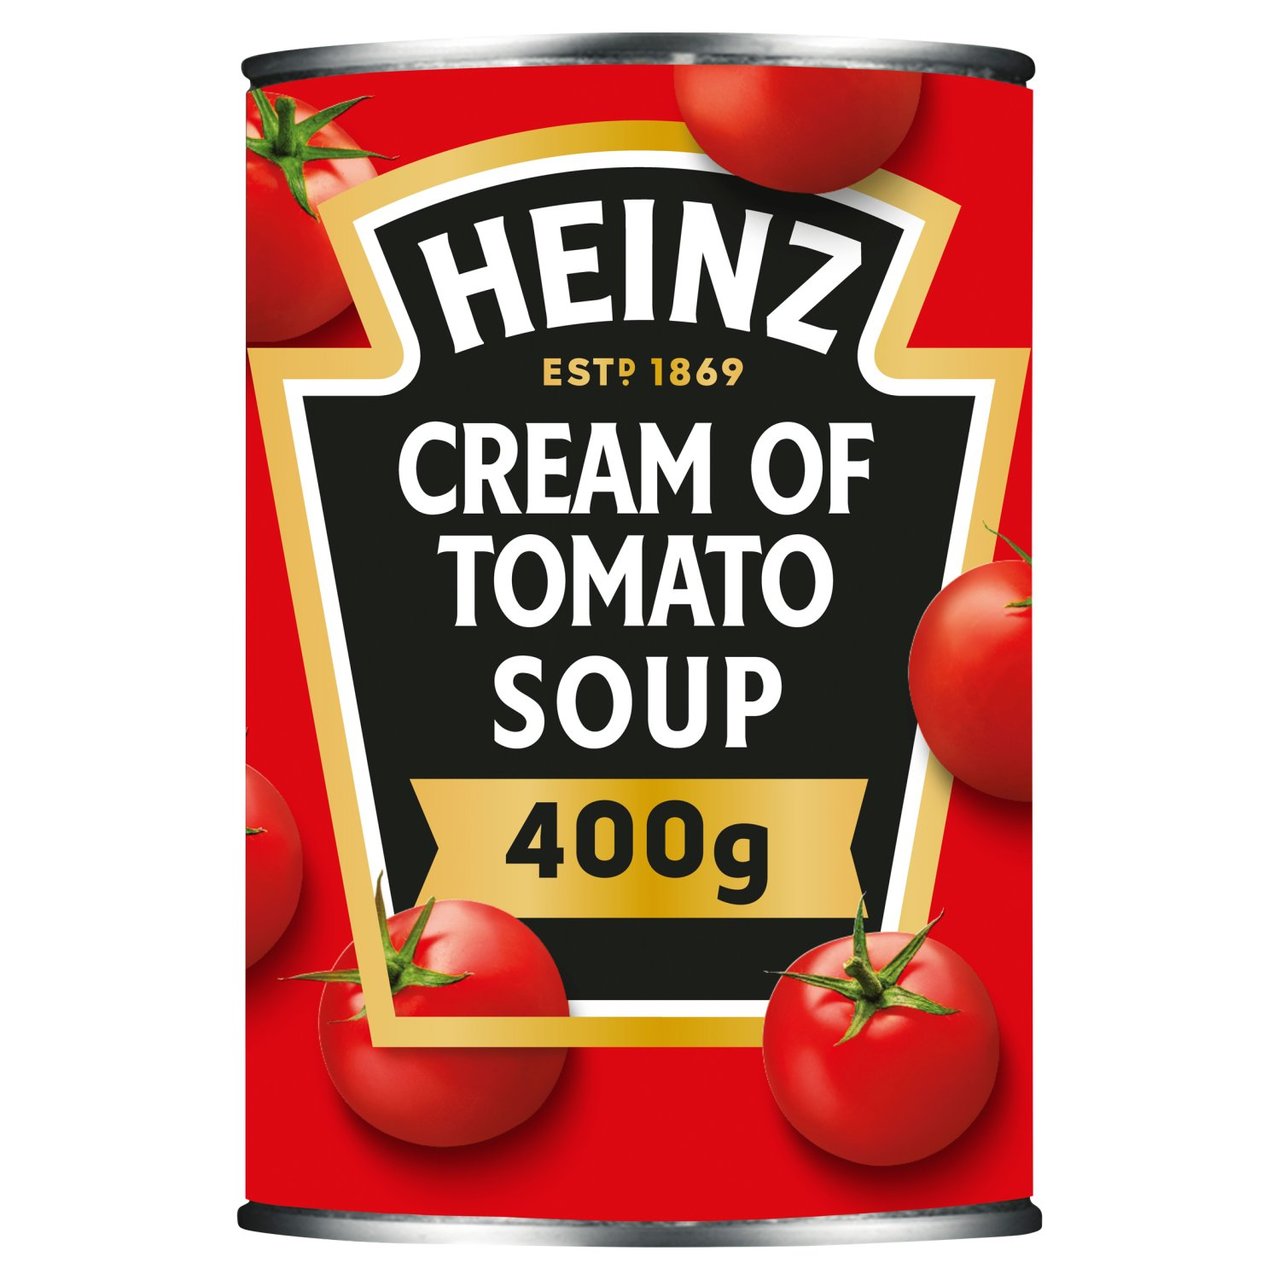 Heinz Cream Of Tomato Canned Soup 400g